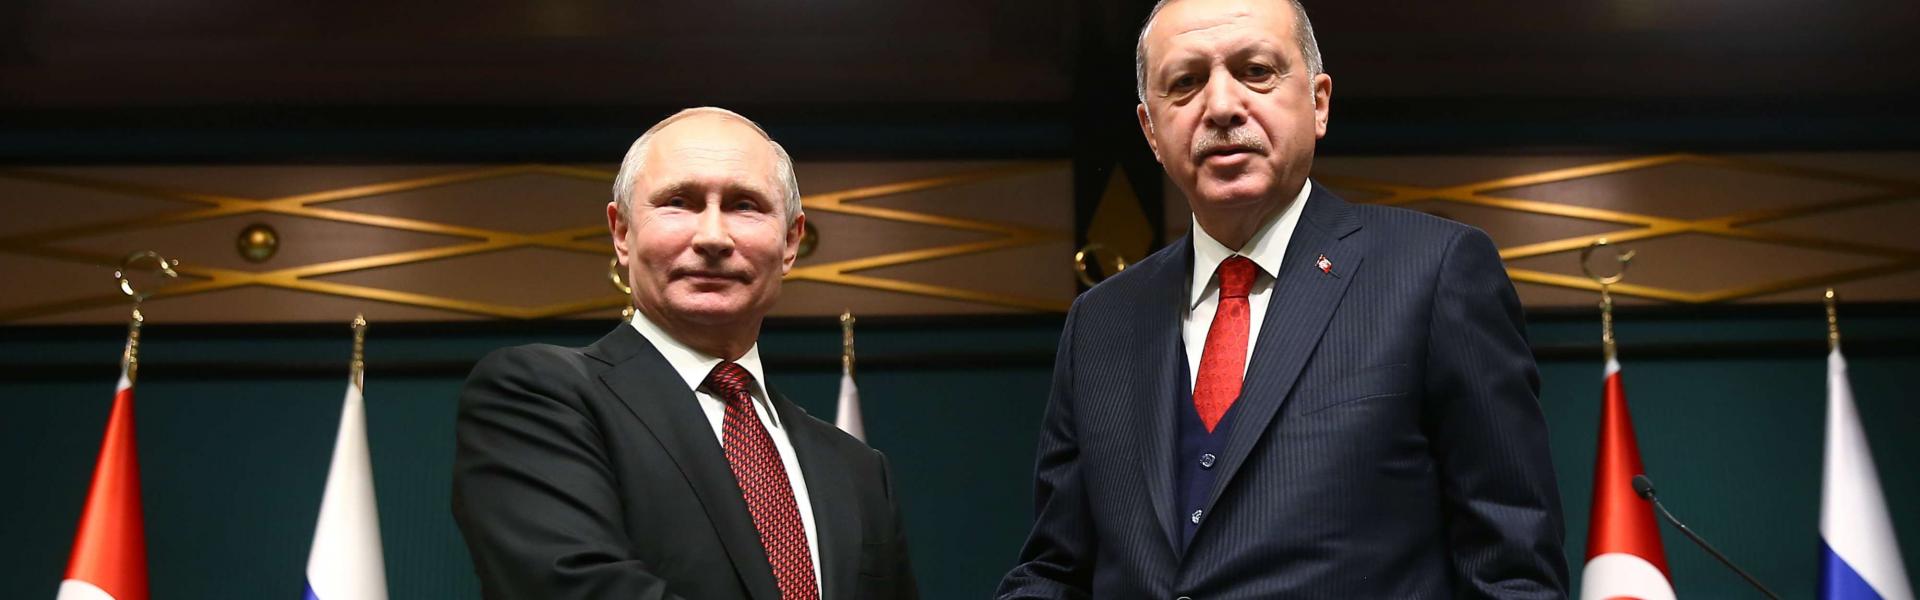 S-400 crisis with U.S. could make Turkey a Russian vassal - analyst 1